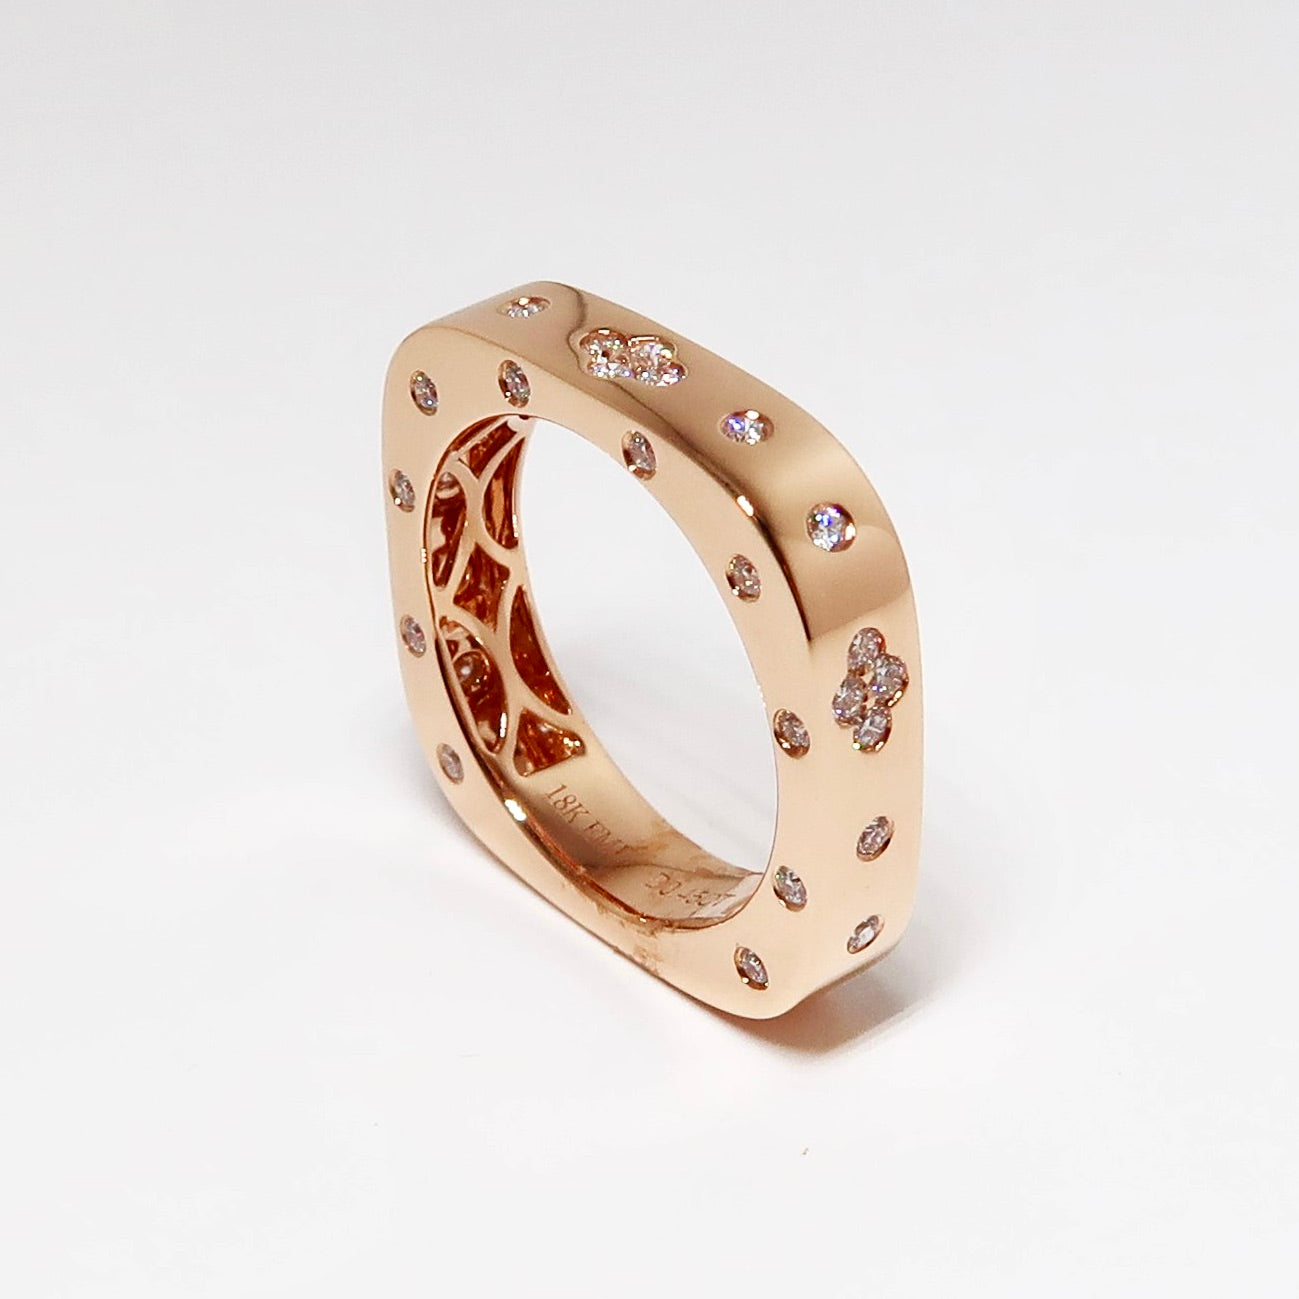 18k Rose Gold Square Design Narrow Ring with Diamonds